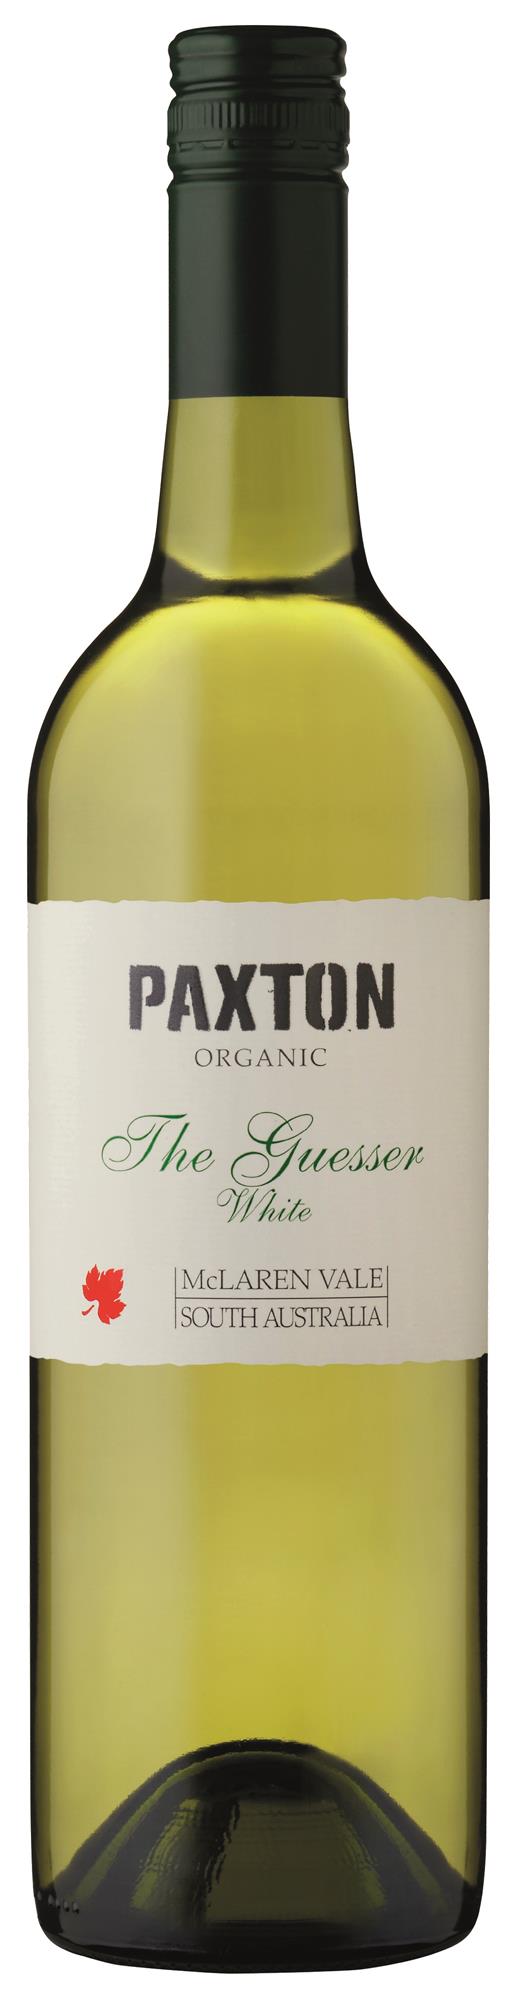 Paxton, The Guesser Organic White, 2016